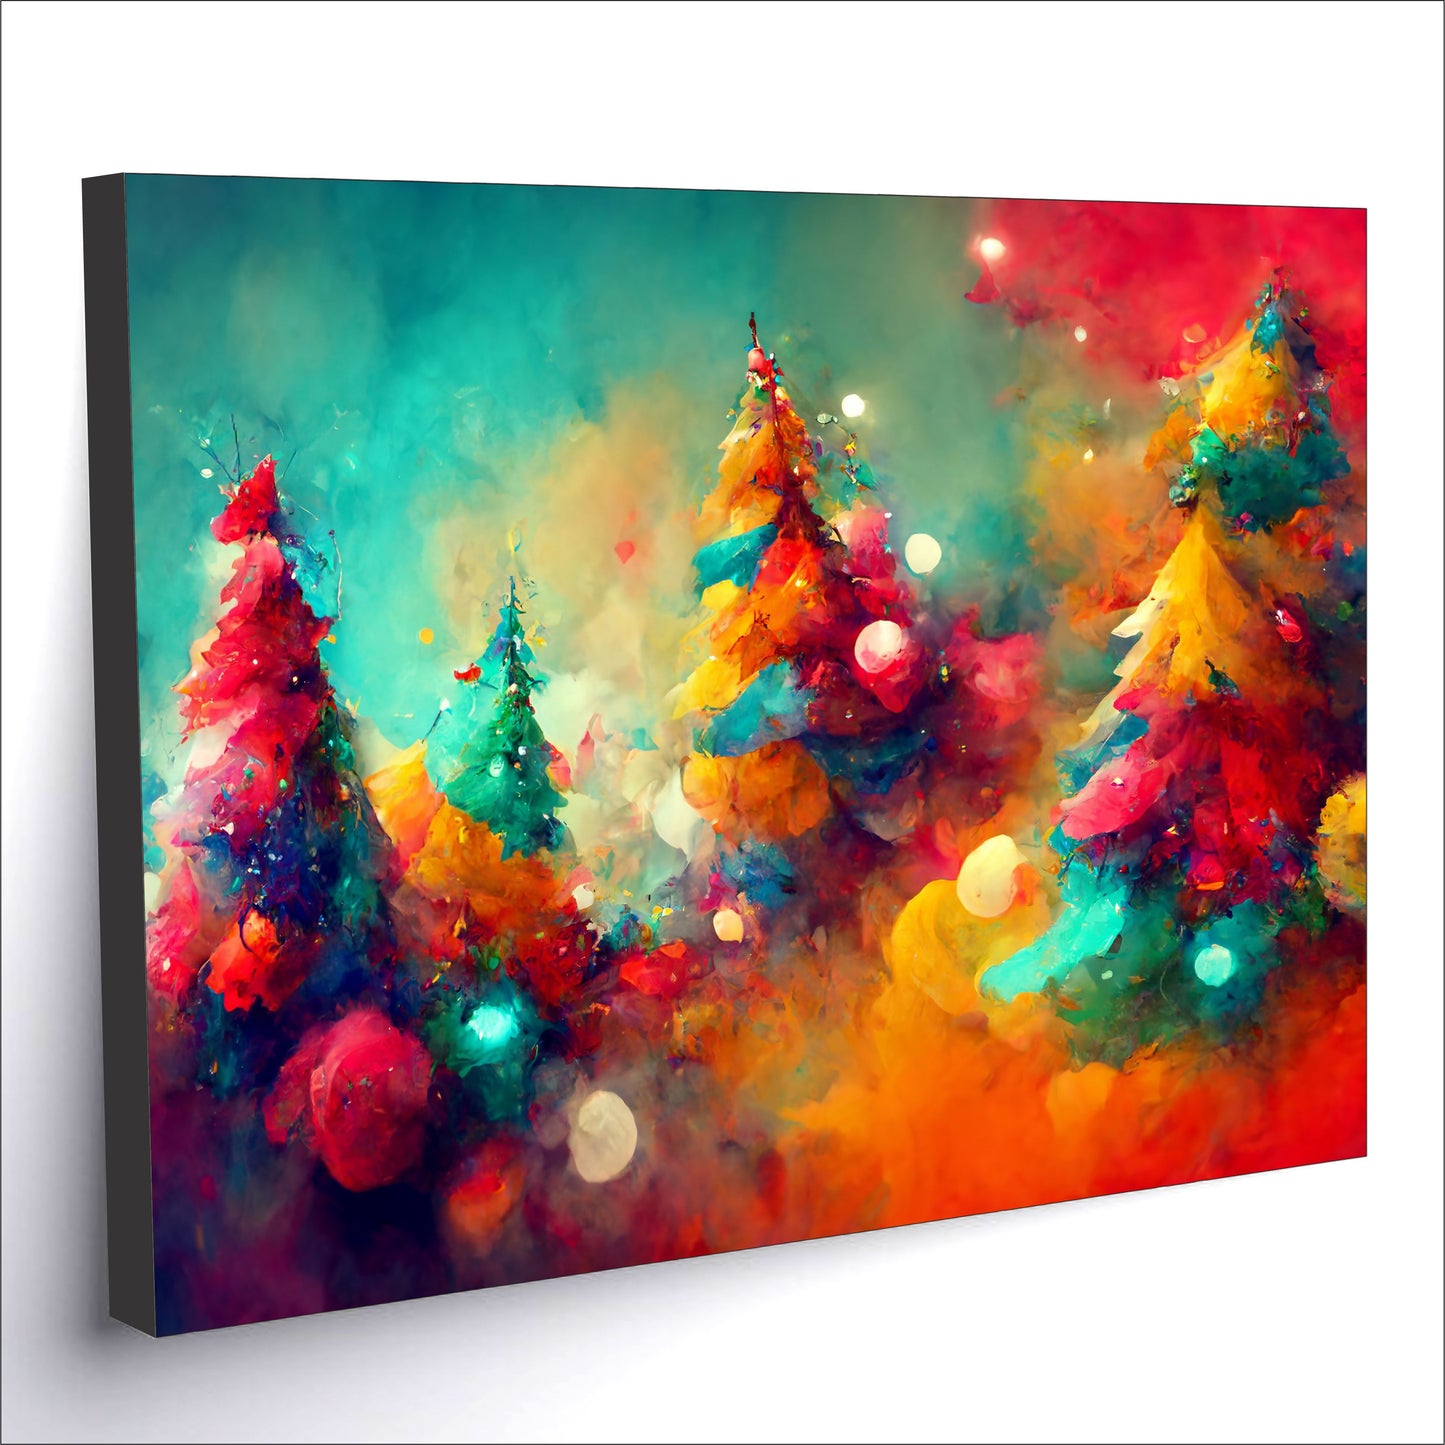 Winter Wonderful Colourful Forest Art